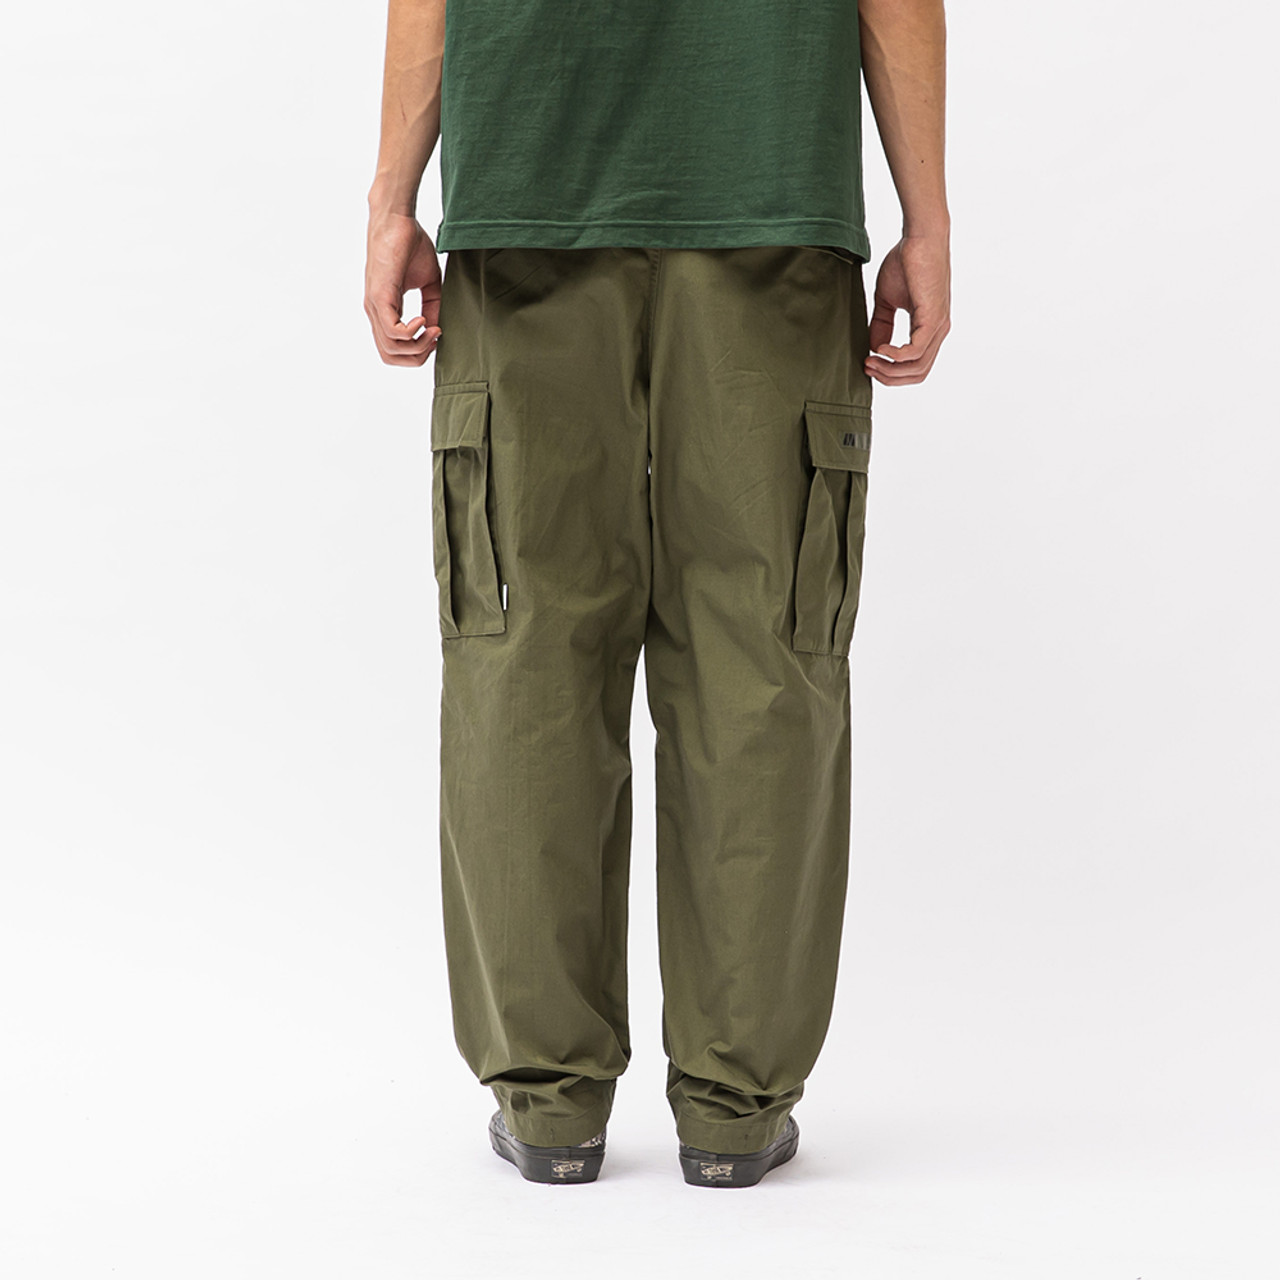 WTAPS Trousers JUNGLE STOCK / TROUSERS / NYCO. RIPSTOP